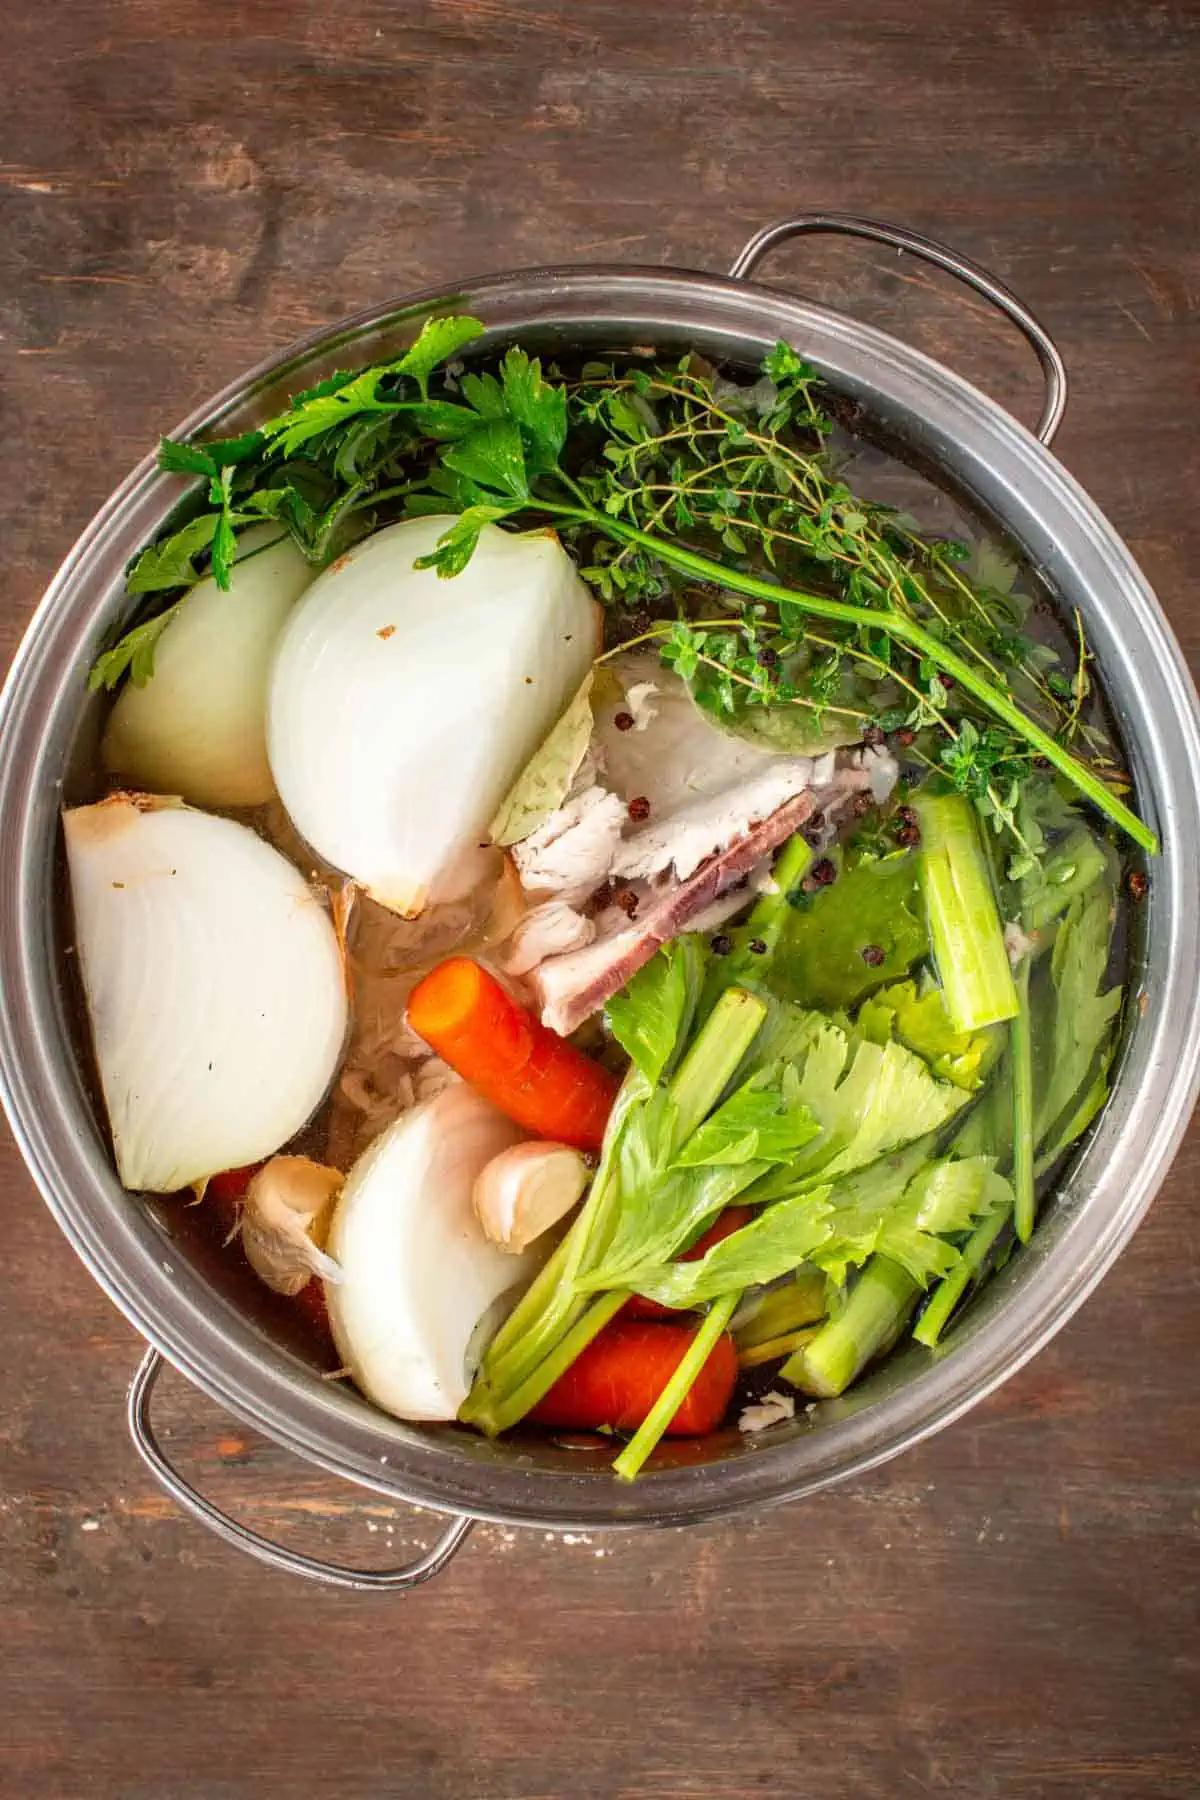 A pot filled with a turkey carcass, vegetables, herbs and water.